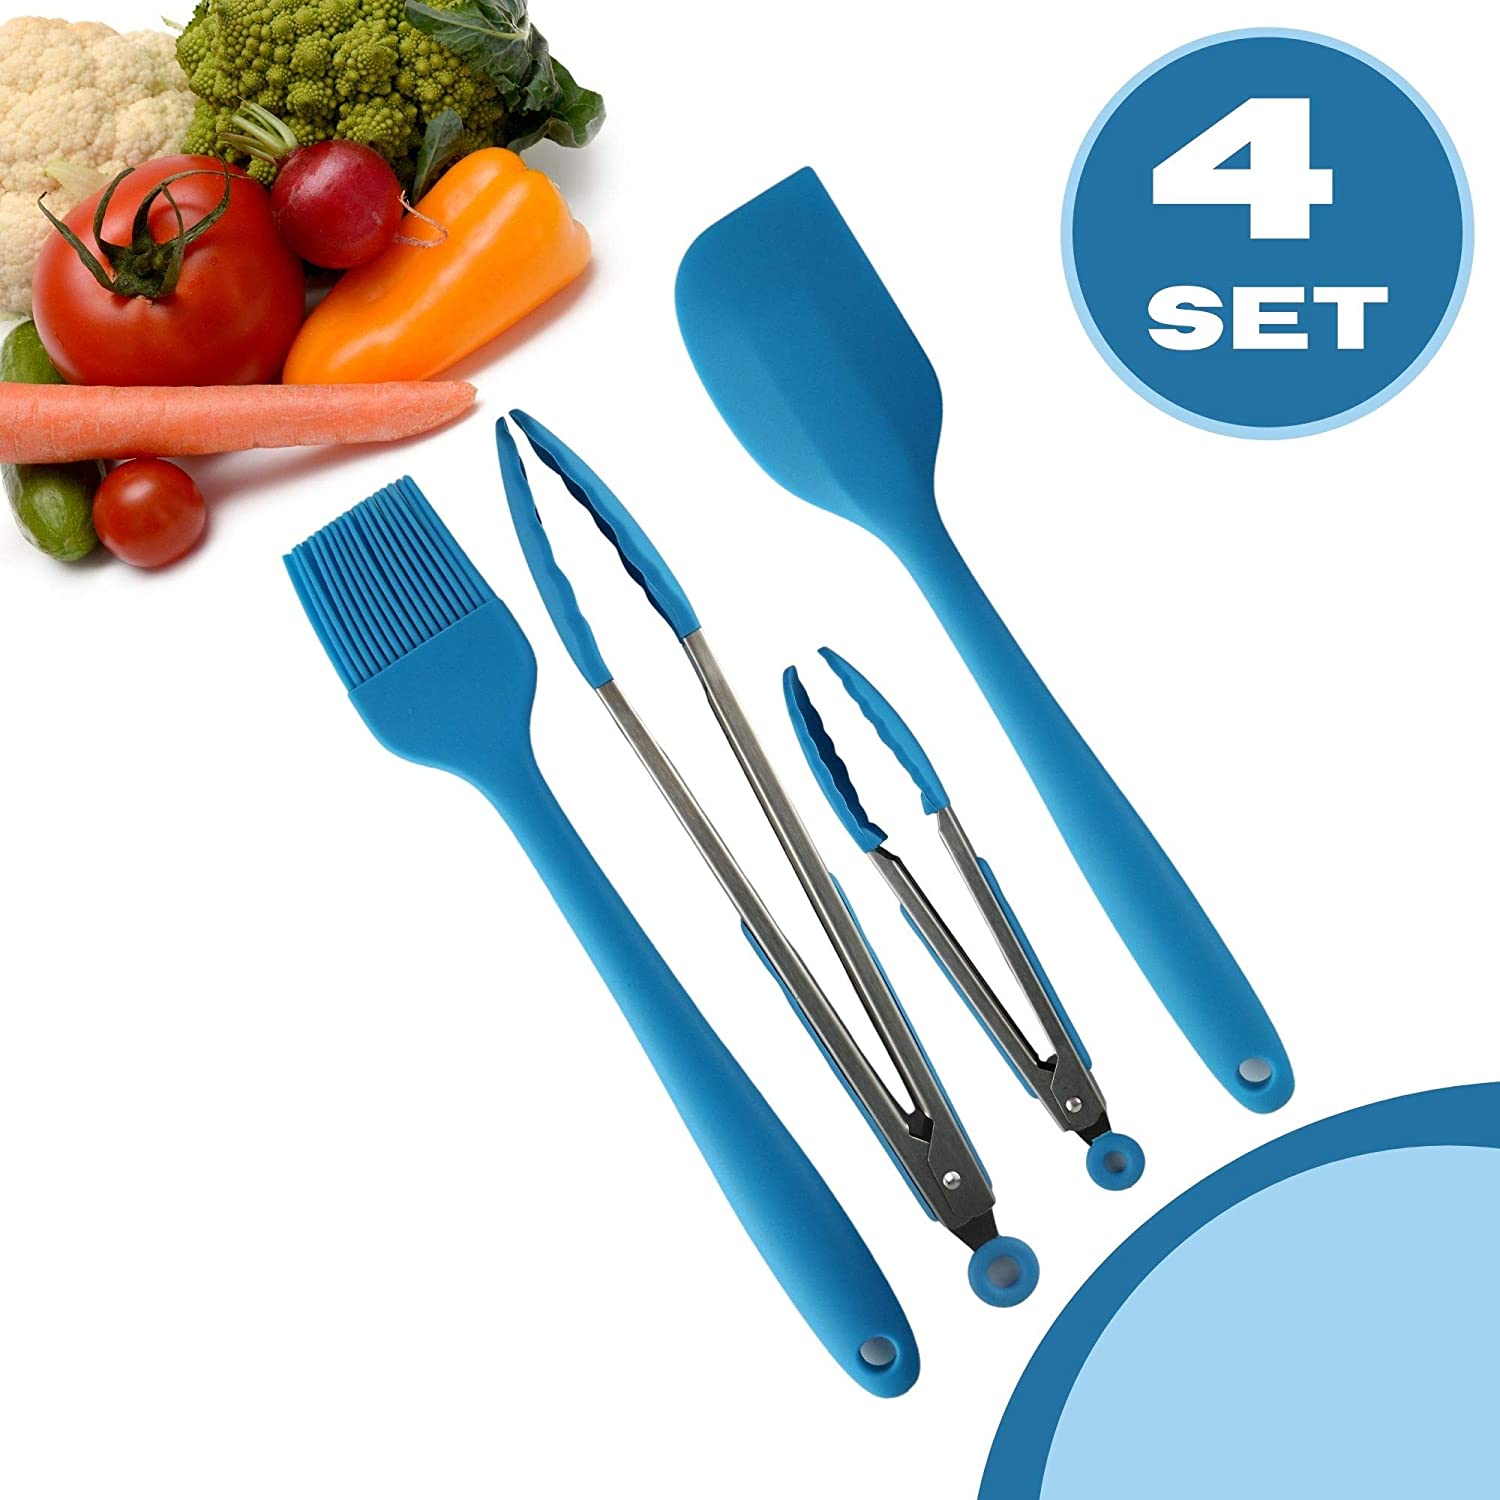 Heavy Duty Silicone Food Basting Brush and Tongs Kitchen Set (4 in 1 Set)